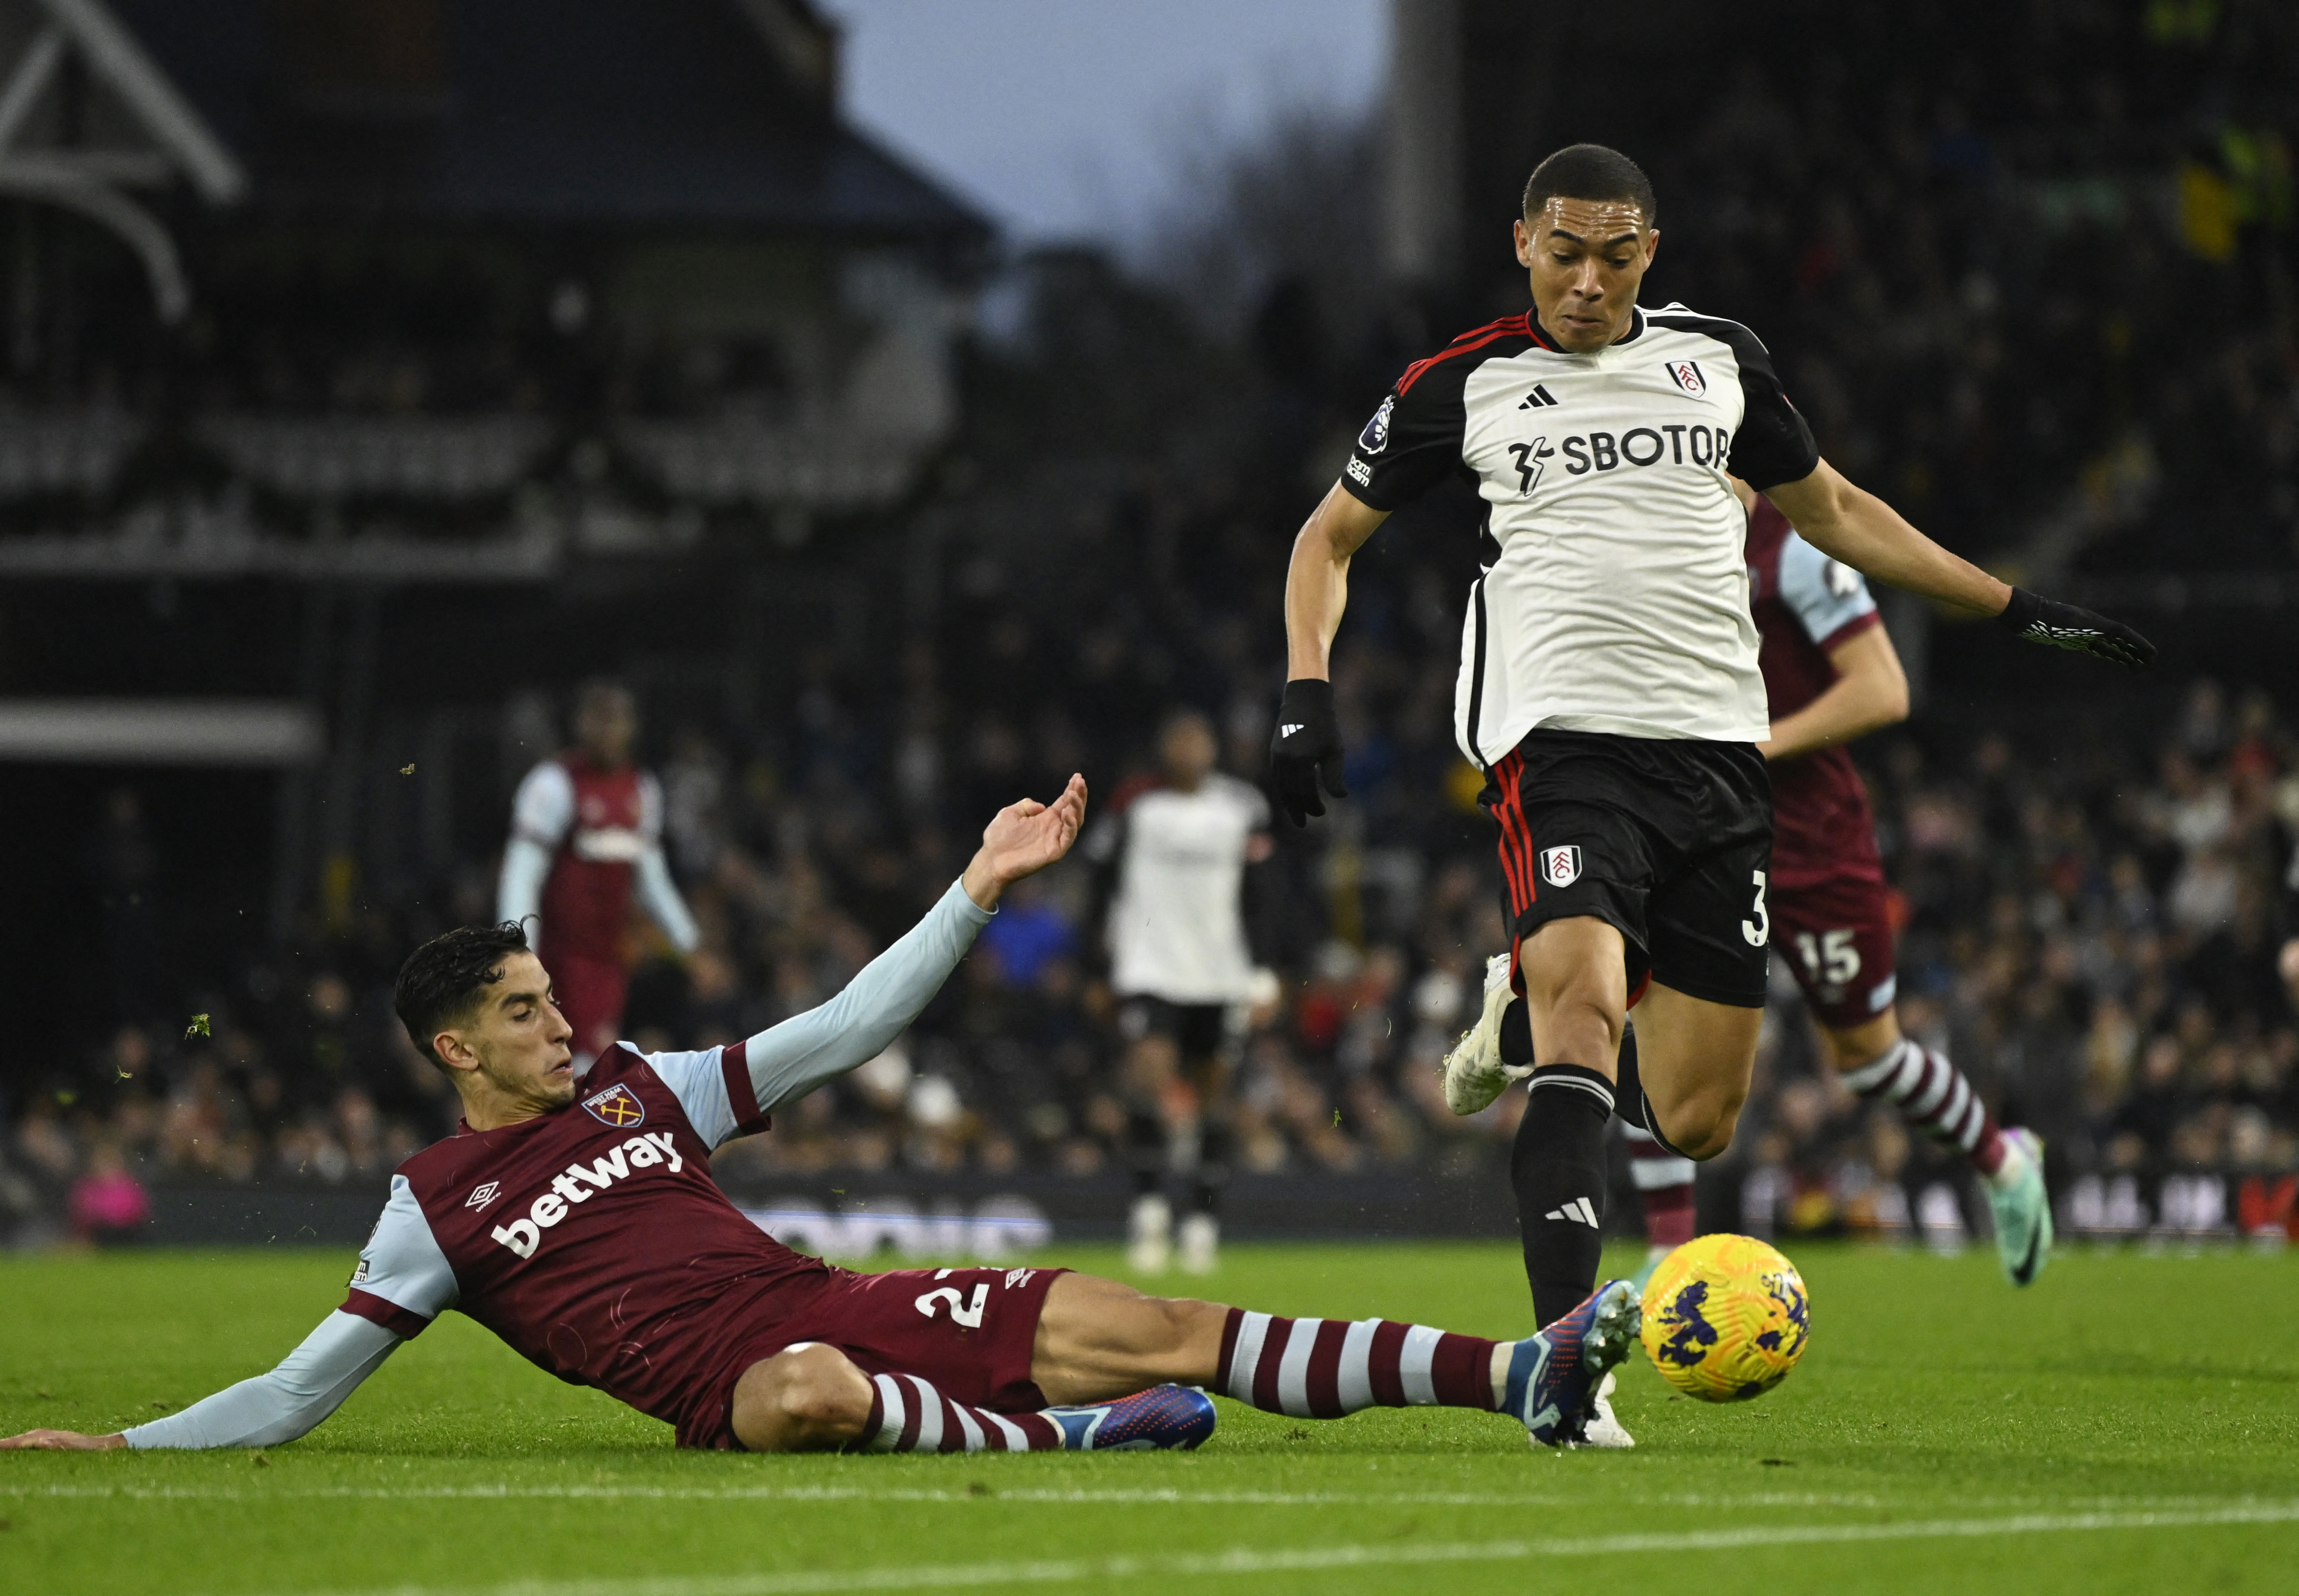 Fulham wins 5-0 in Premier League for 2nd time in 4 days after thrashing  West Ham